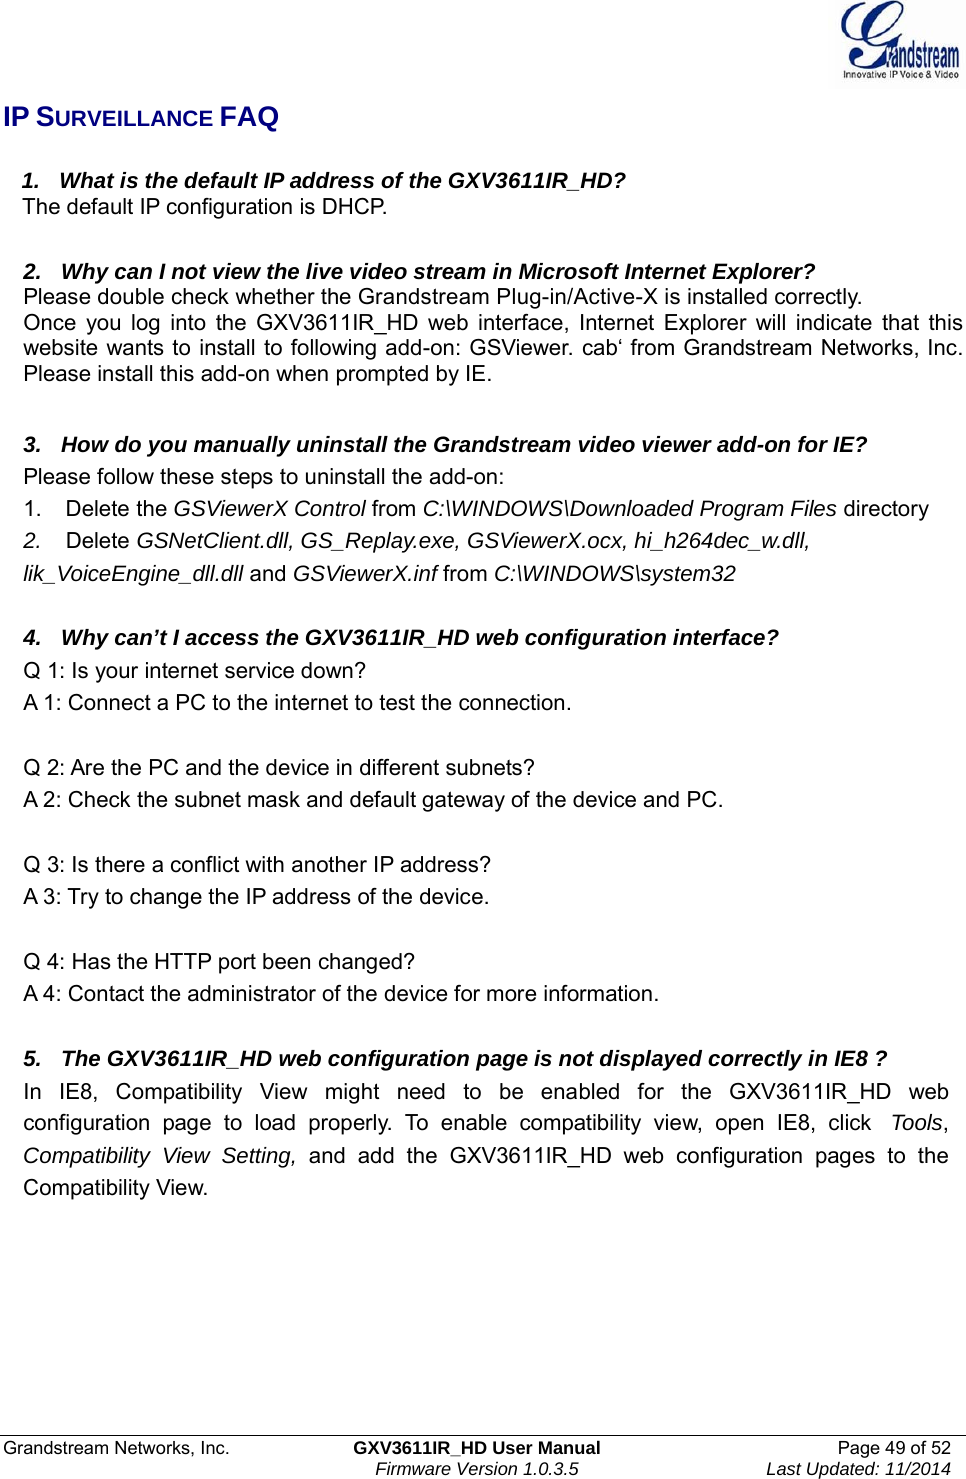  Grandstream Networks, Inc.  GXV3611IR_HD User Manual  Page 49 of 52    Firmware Version 1.0.3.5  Last Updated: 11/2014 IP SURVEILLANCE FAQ     1.   What is the default IP address of the GXV3611IR_HD?    The default IP configuration is DHCP.   2.   Why can I not view the live video stream in Microsoft Internet Explorer? Please double check whether the Grandstream Plug-in/Active-X is installed correctly. Once you log into the GXV3611IR_HD web interface, Internet Explorer will indicate that this website wants to install to following add-on: GSViewer. cab‘ from Grandstream Networks, Inc. Please install this add-on when prompted by IE.   3.   How do you manually uninstall the Grandstream video viewer add-on for IE? Please follow these steps to uninstall the add-on: 1.    Delete the GSViewerX Control from C:\WINDOWS\Downloaded Program Files directory 2.    Delete GSNetClient.dll, GS_Replay.exe, GSViewerX.ocx, hi_h264dec_w.dll, lik_VoiceEngine_dll.dll and GSViewerX.inf from C:\WINDOWS\system32   4.   Why can’t I access the GXV3611IR_HD web configuration interface? Q 1: Is your internet service down? A 1: Connect a PC to the internet to test the connection.   Q 2: Are the PC and the device in different subnets? A 2: Check the subnet mask and default gateway of the device and PC.   Q 3: Is there a conflict with another IP address? A 3: Try to change the IP address of the device.   Q 4: Has the HTTP port been changed? A 4: Contact the administrator of the device for more information.   5.   The GXV3611IR_HD web configuration page is not displayed correctly in IE8 ? In IE8, Compatibility View might need to be enabled for the GXV3611IR_HD web configuration page to load properly. To enable compatibility view, open IE8, click  Tools, Compatibility View Setting, and add the GXV3611IR_HD web configuration pages to the Compatibility View.   